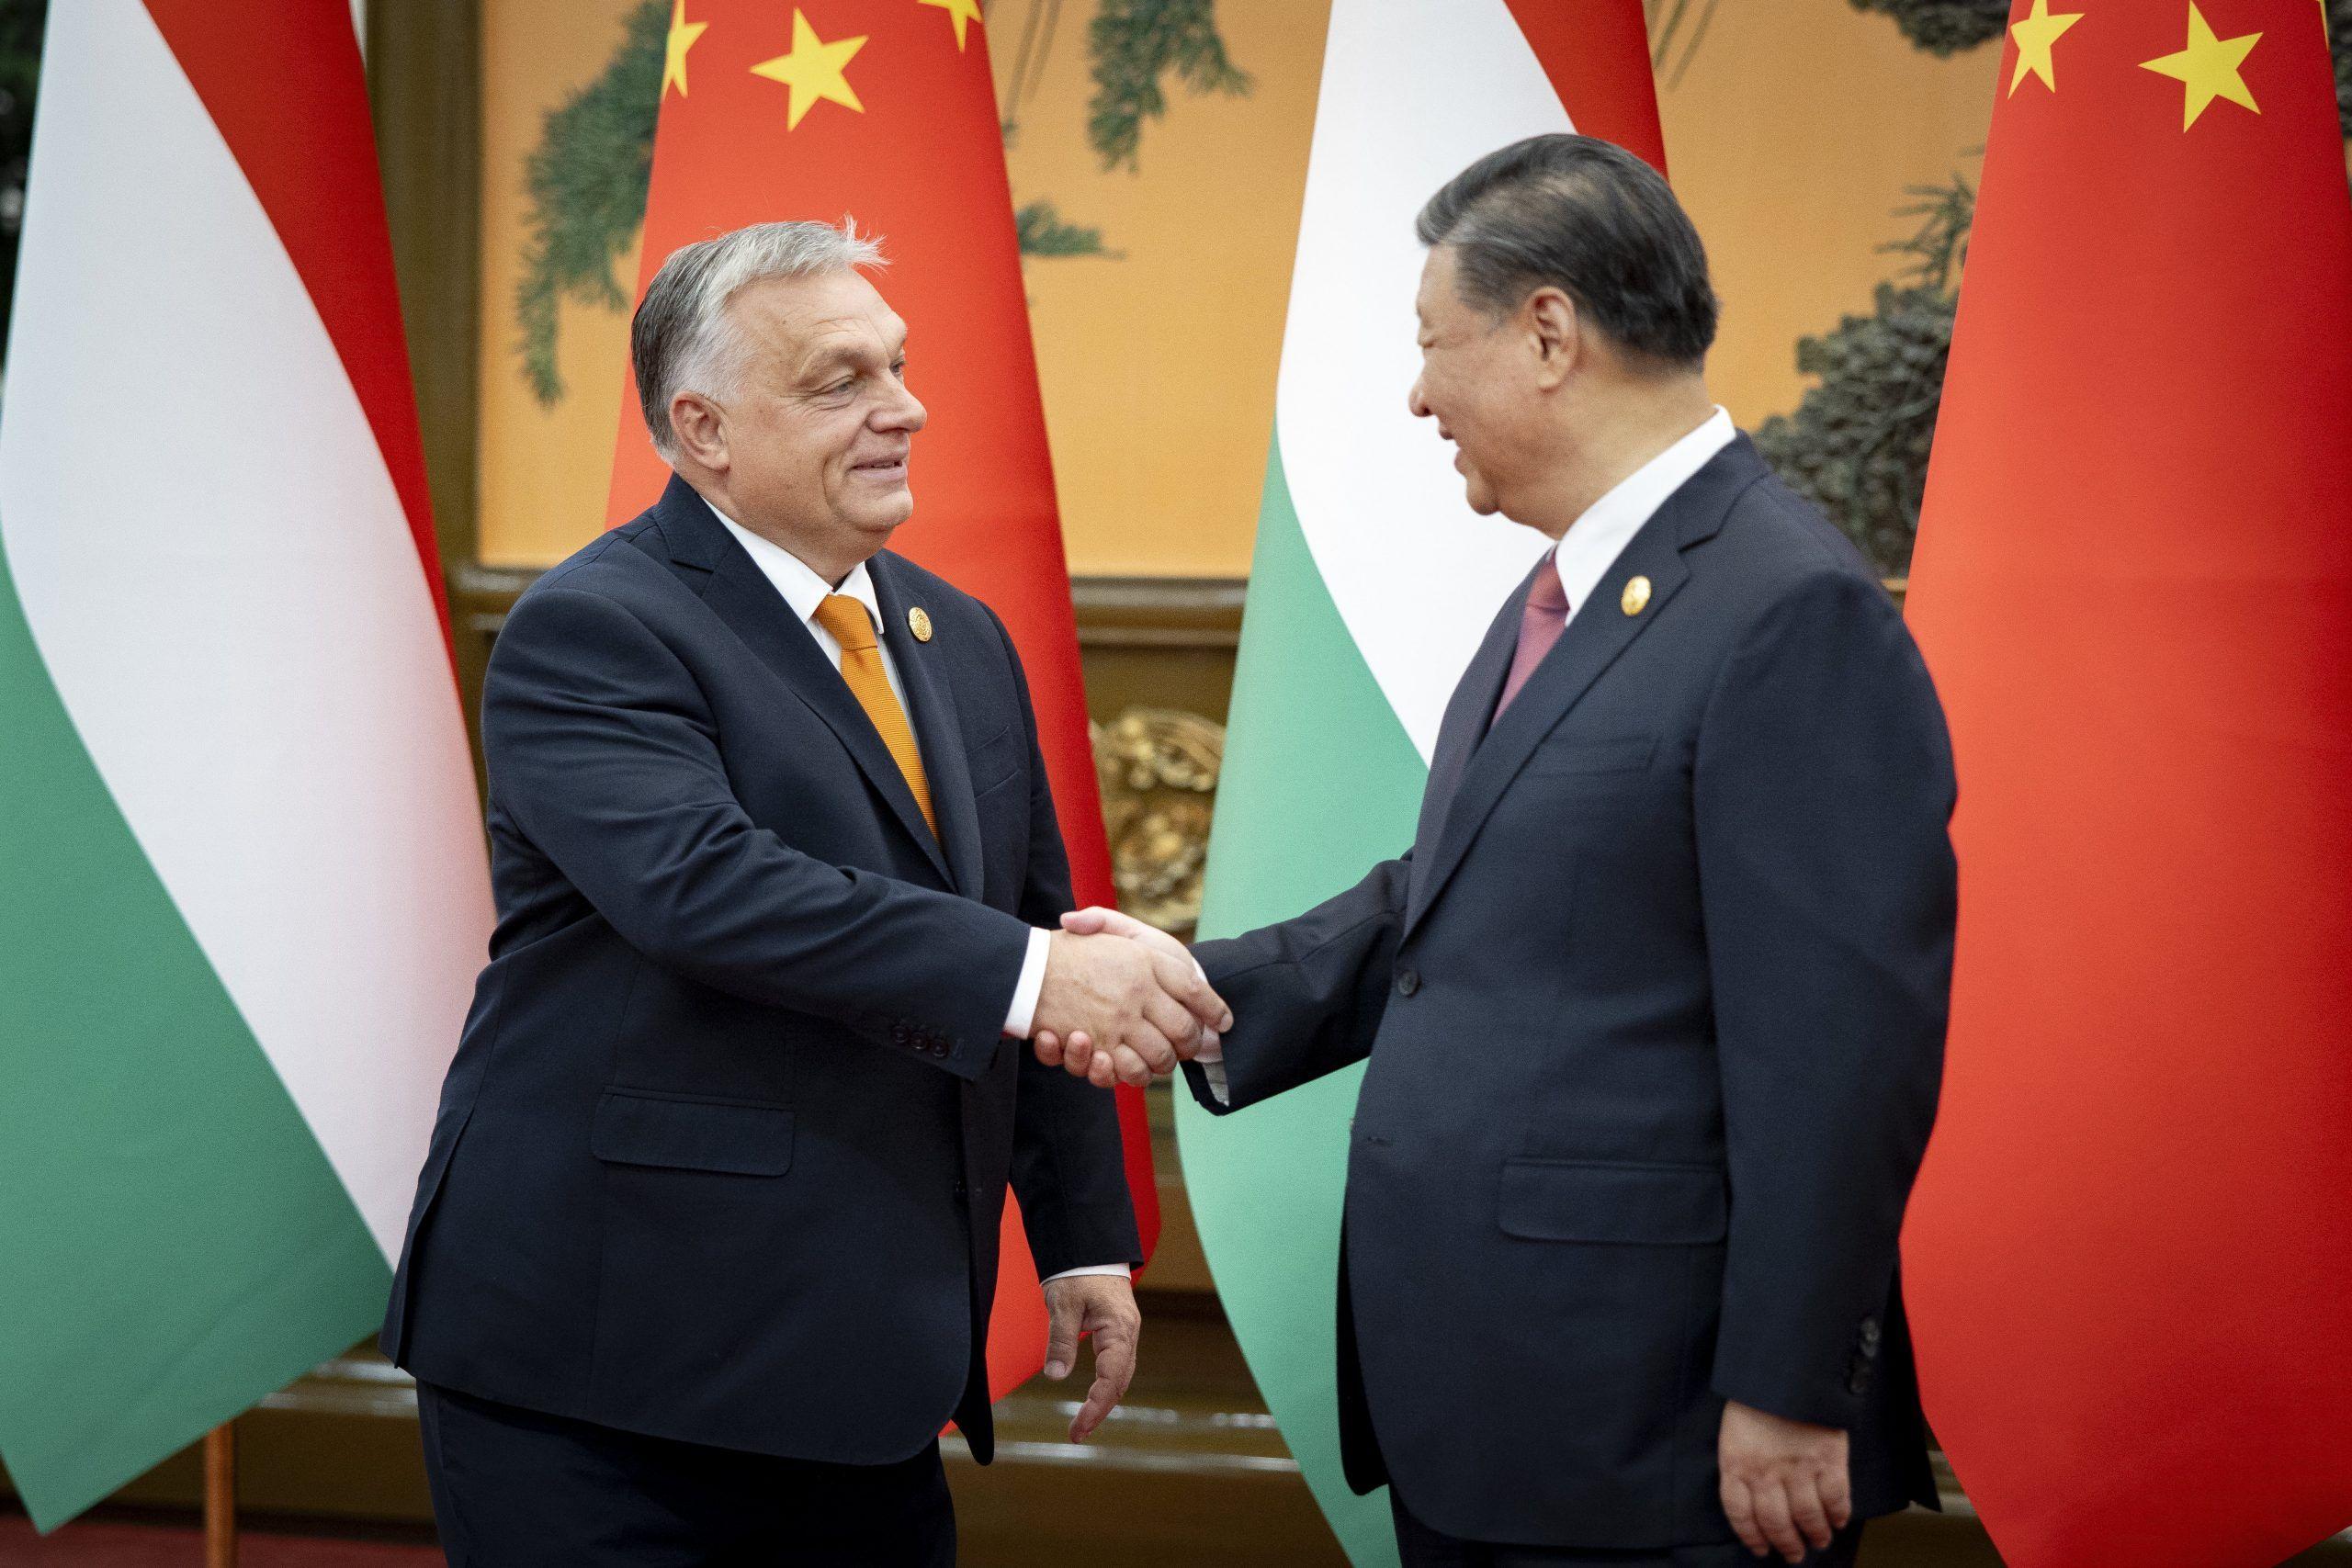 Hungarian PM Orban arrived in China